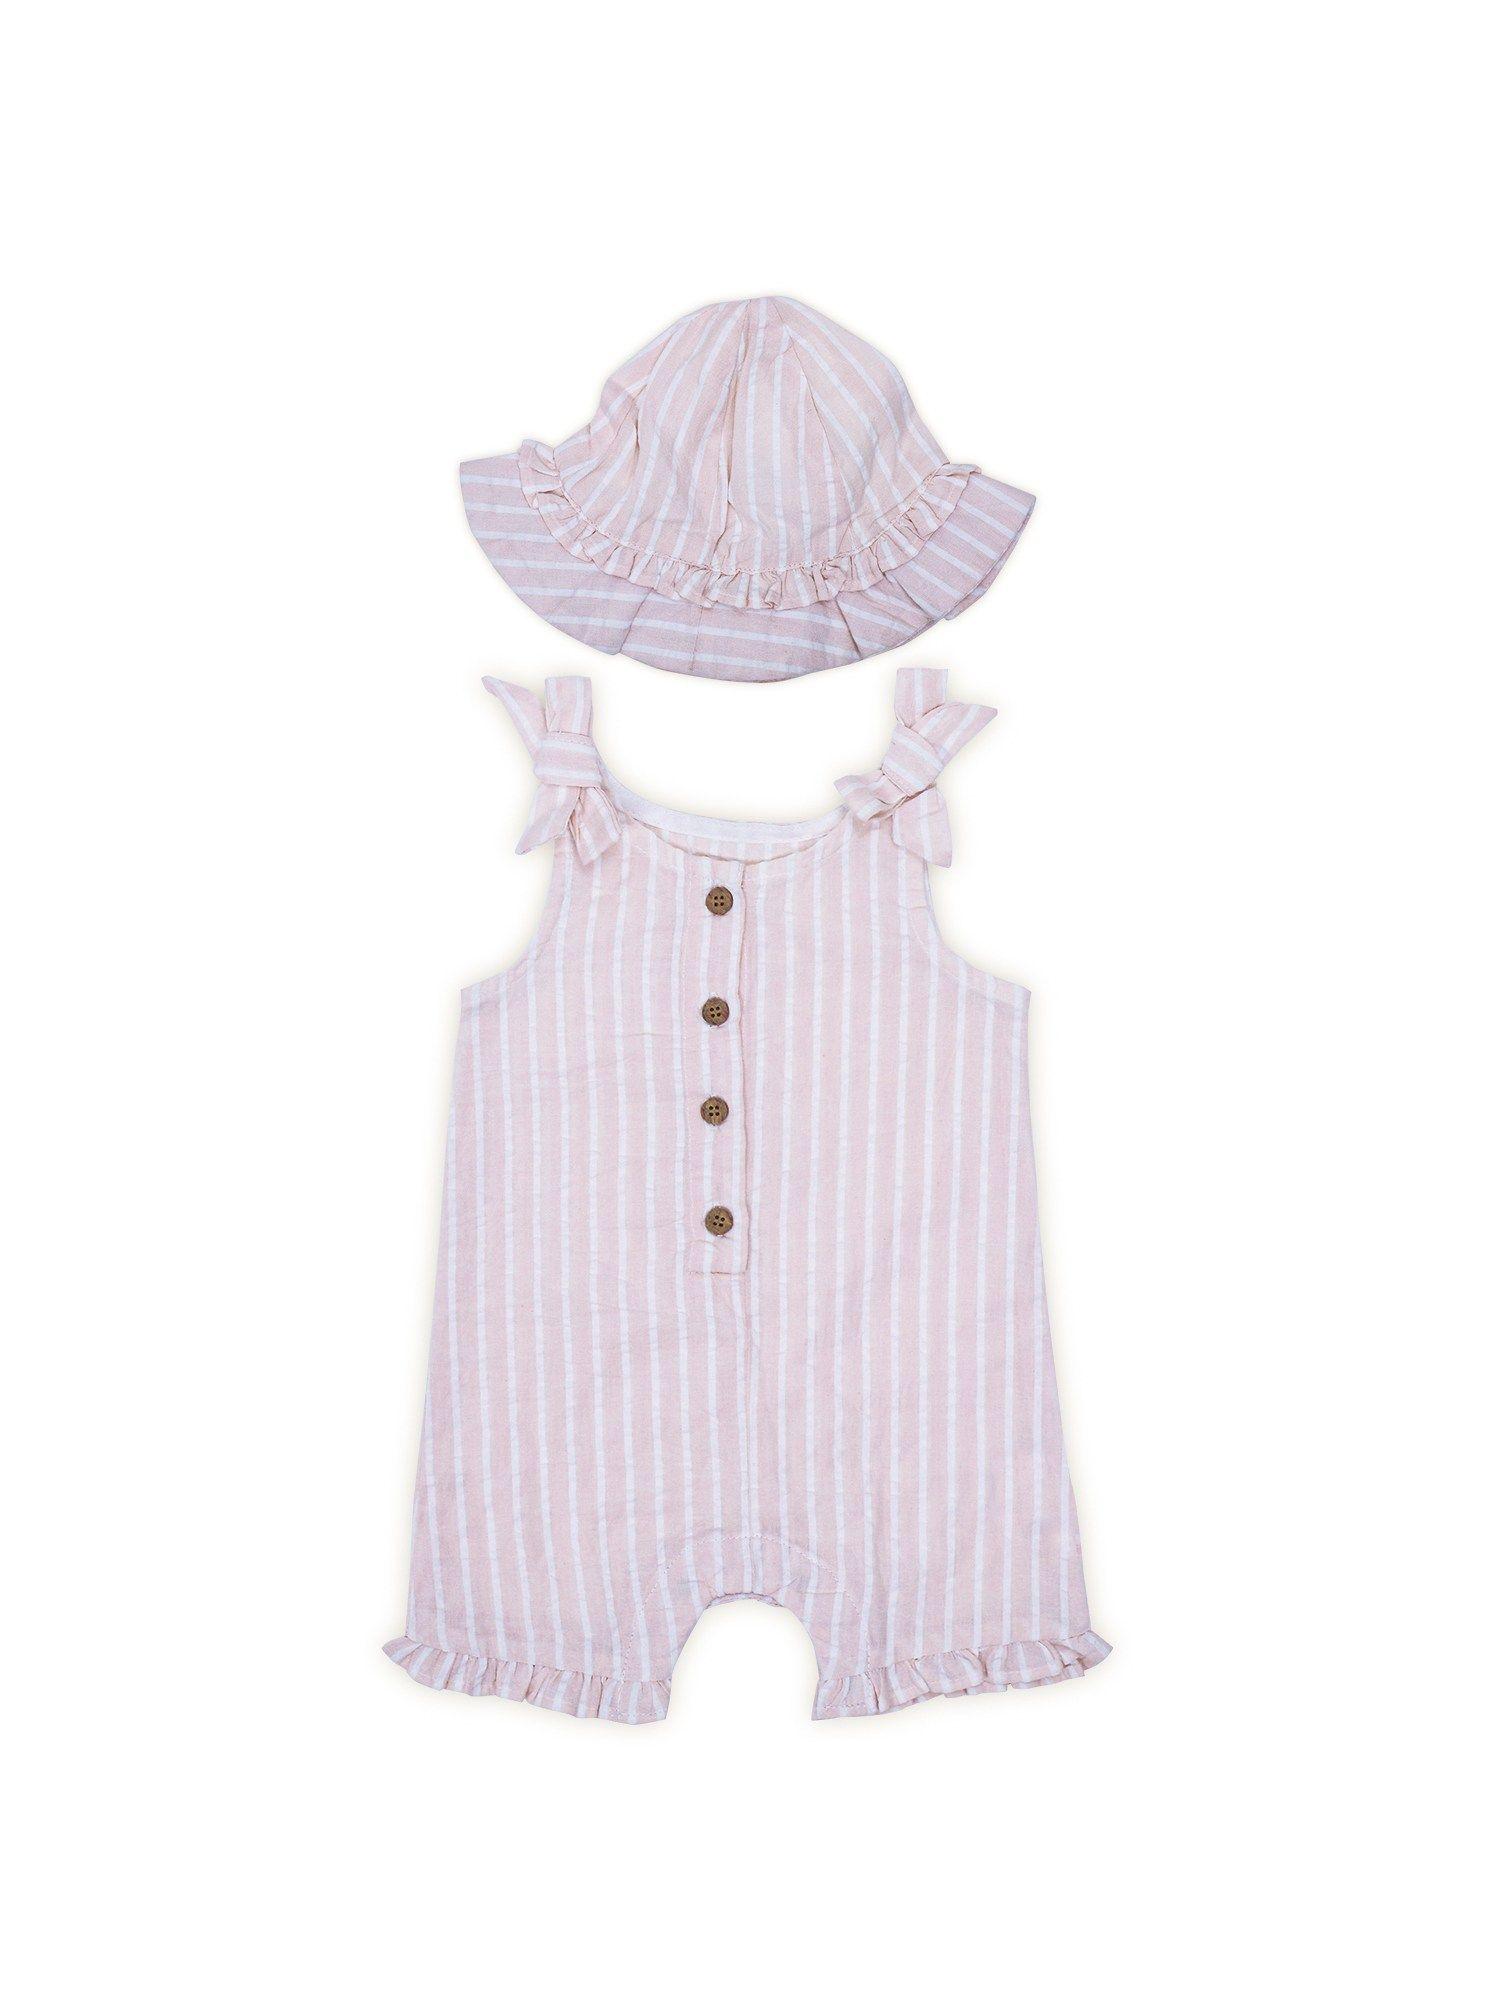 sleeveless romper with cap check print pink